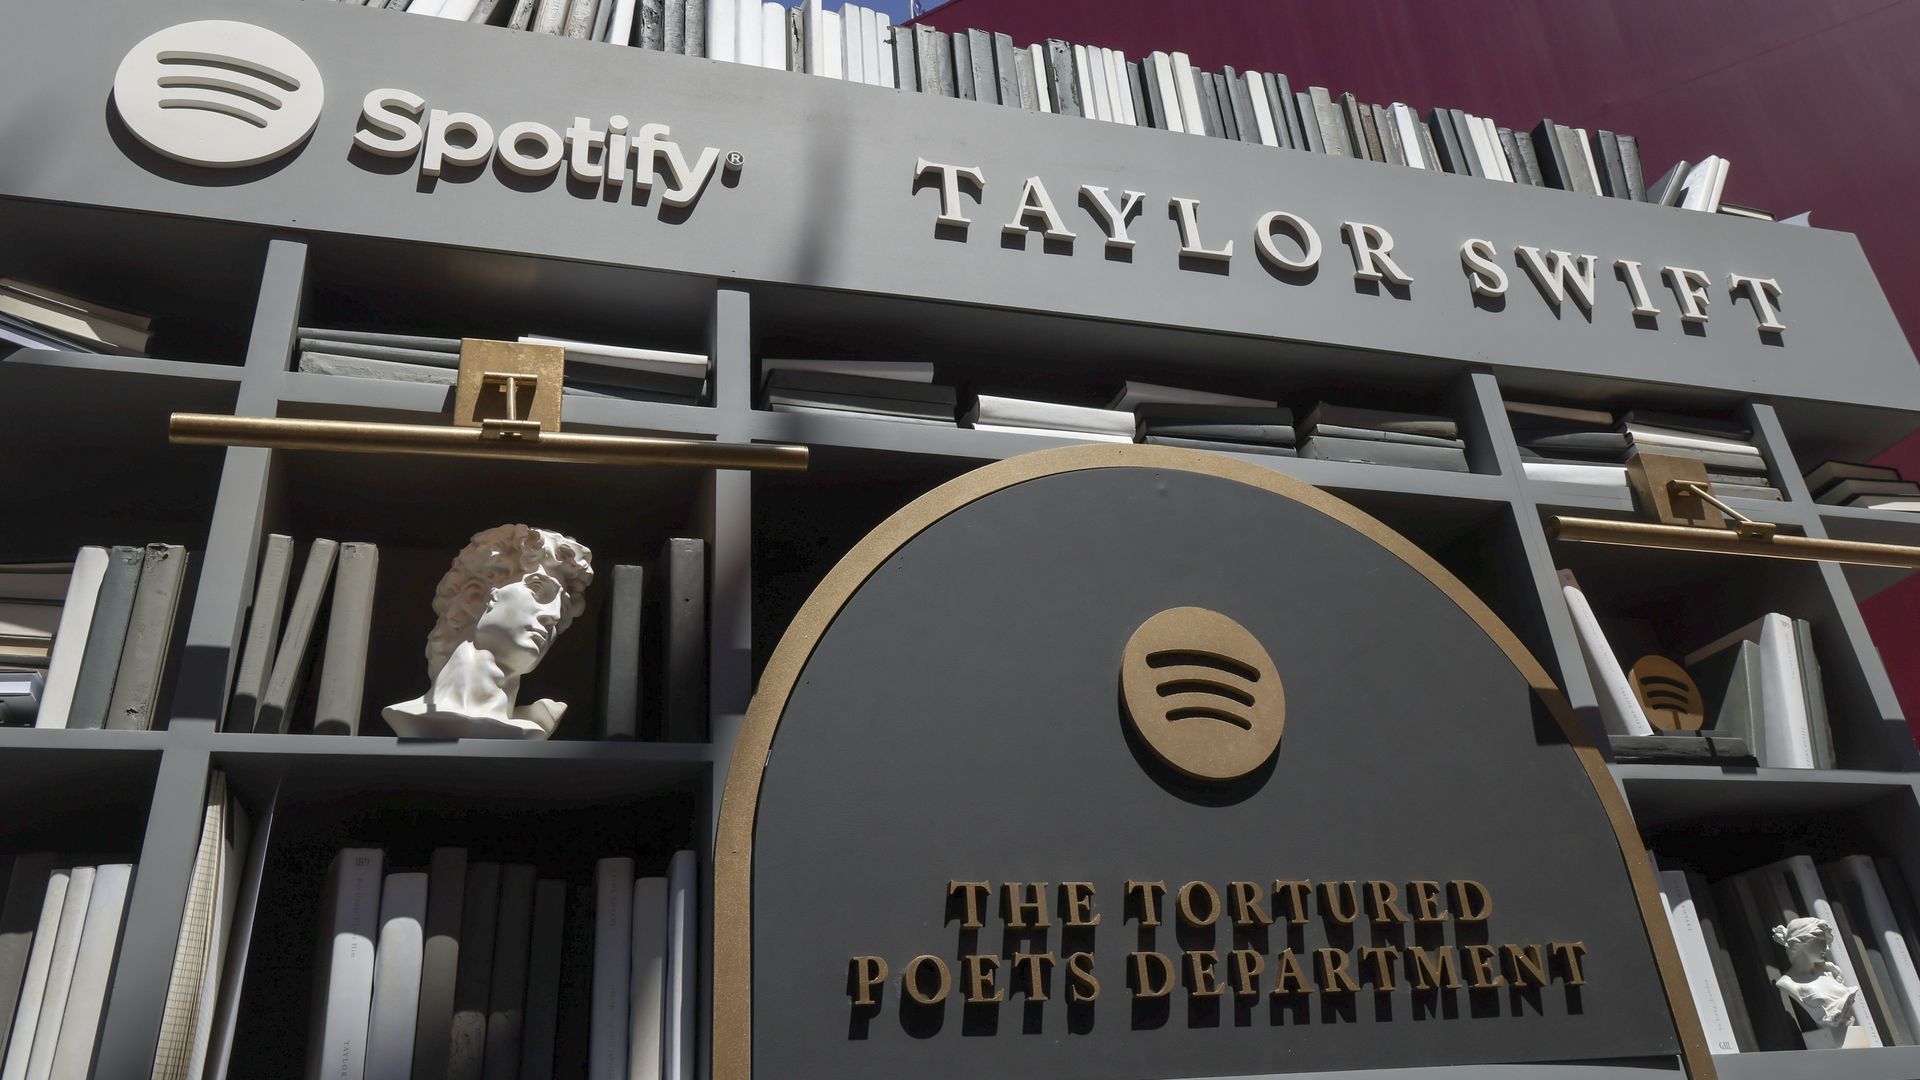 A bookshelf with gray and white books and signs that say "Spotify Taylor Swift" and "The Tortured Poets Department."